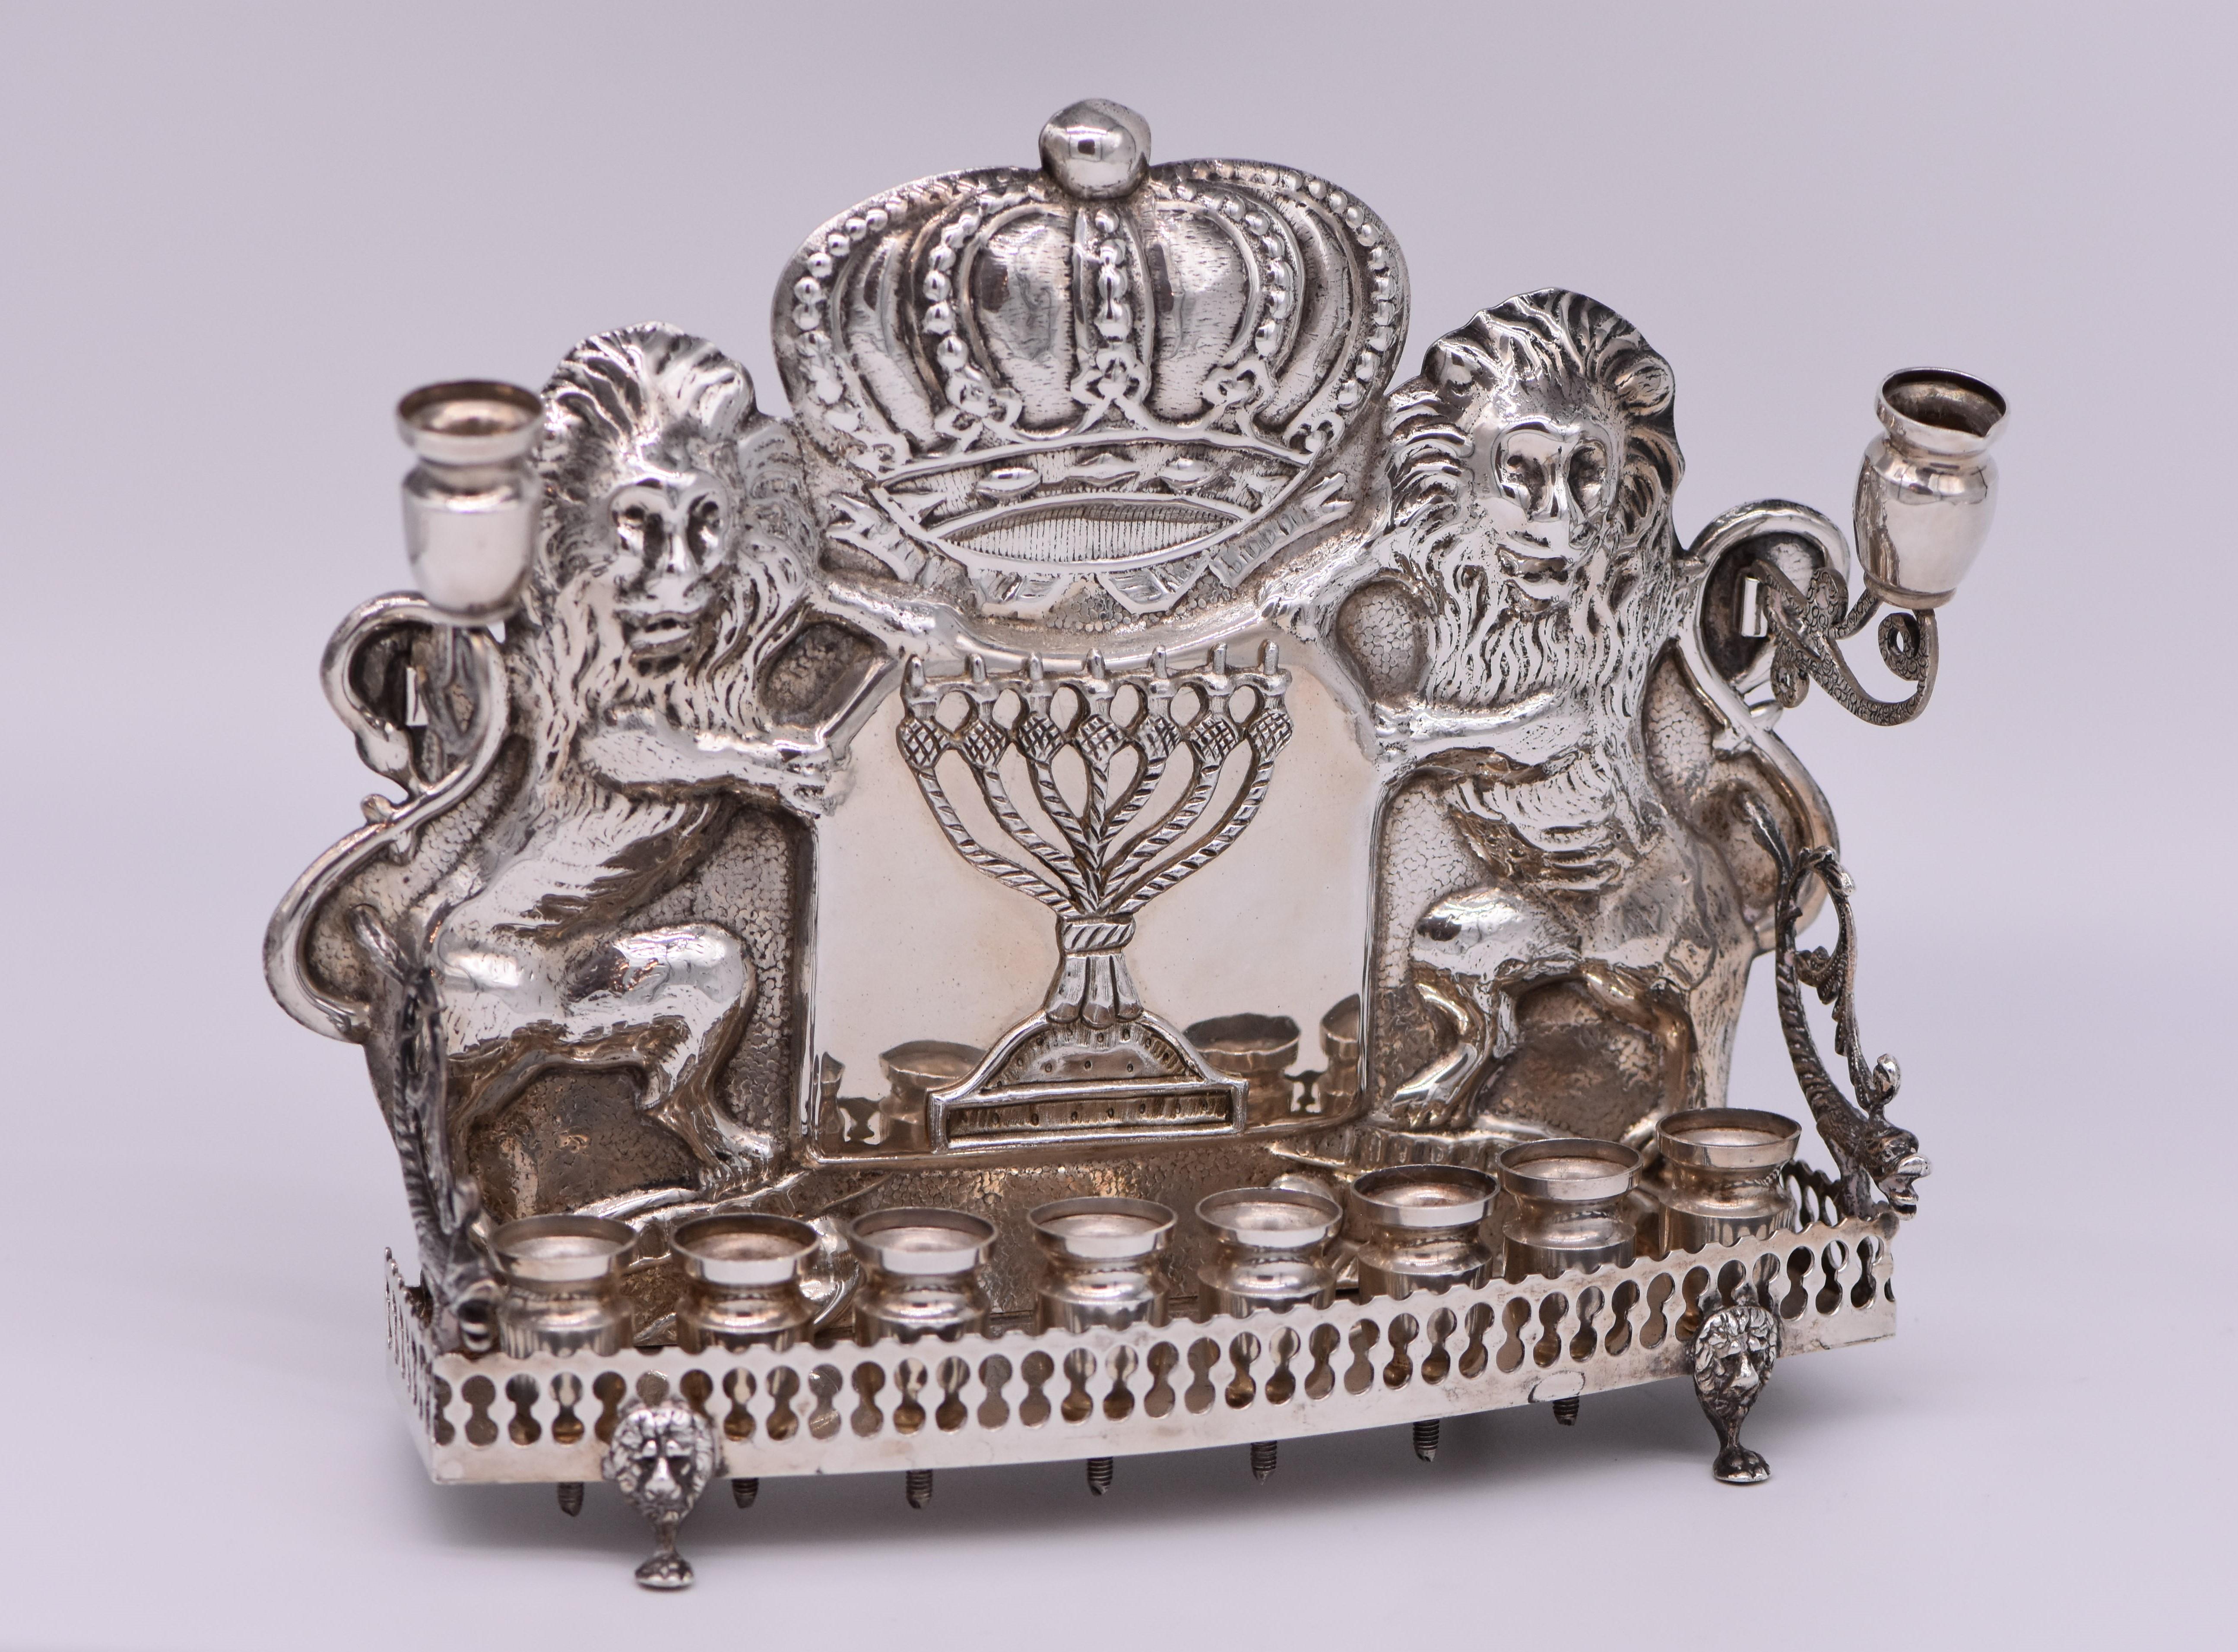 American sterling silver Hanukkah lamp, Lower east side, New York, circa 1900
The backplate embossed with a crown flanked with two lions, and applied with the Temple Menorah in the center. The front fitted with eight candle holders behind decorative